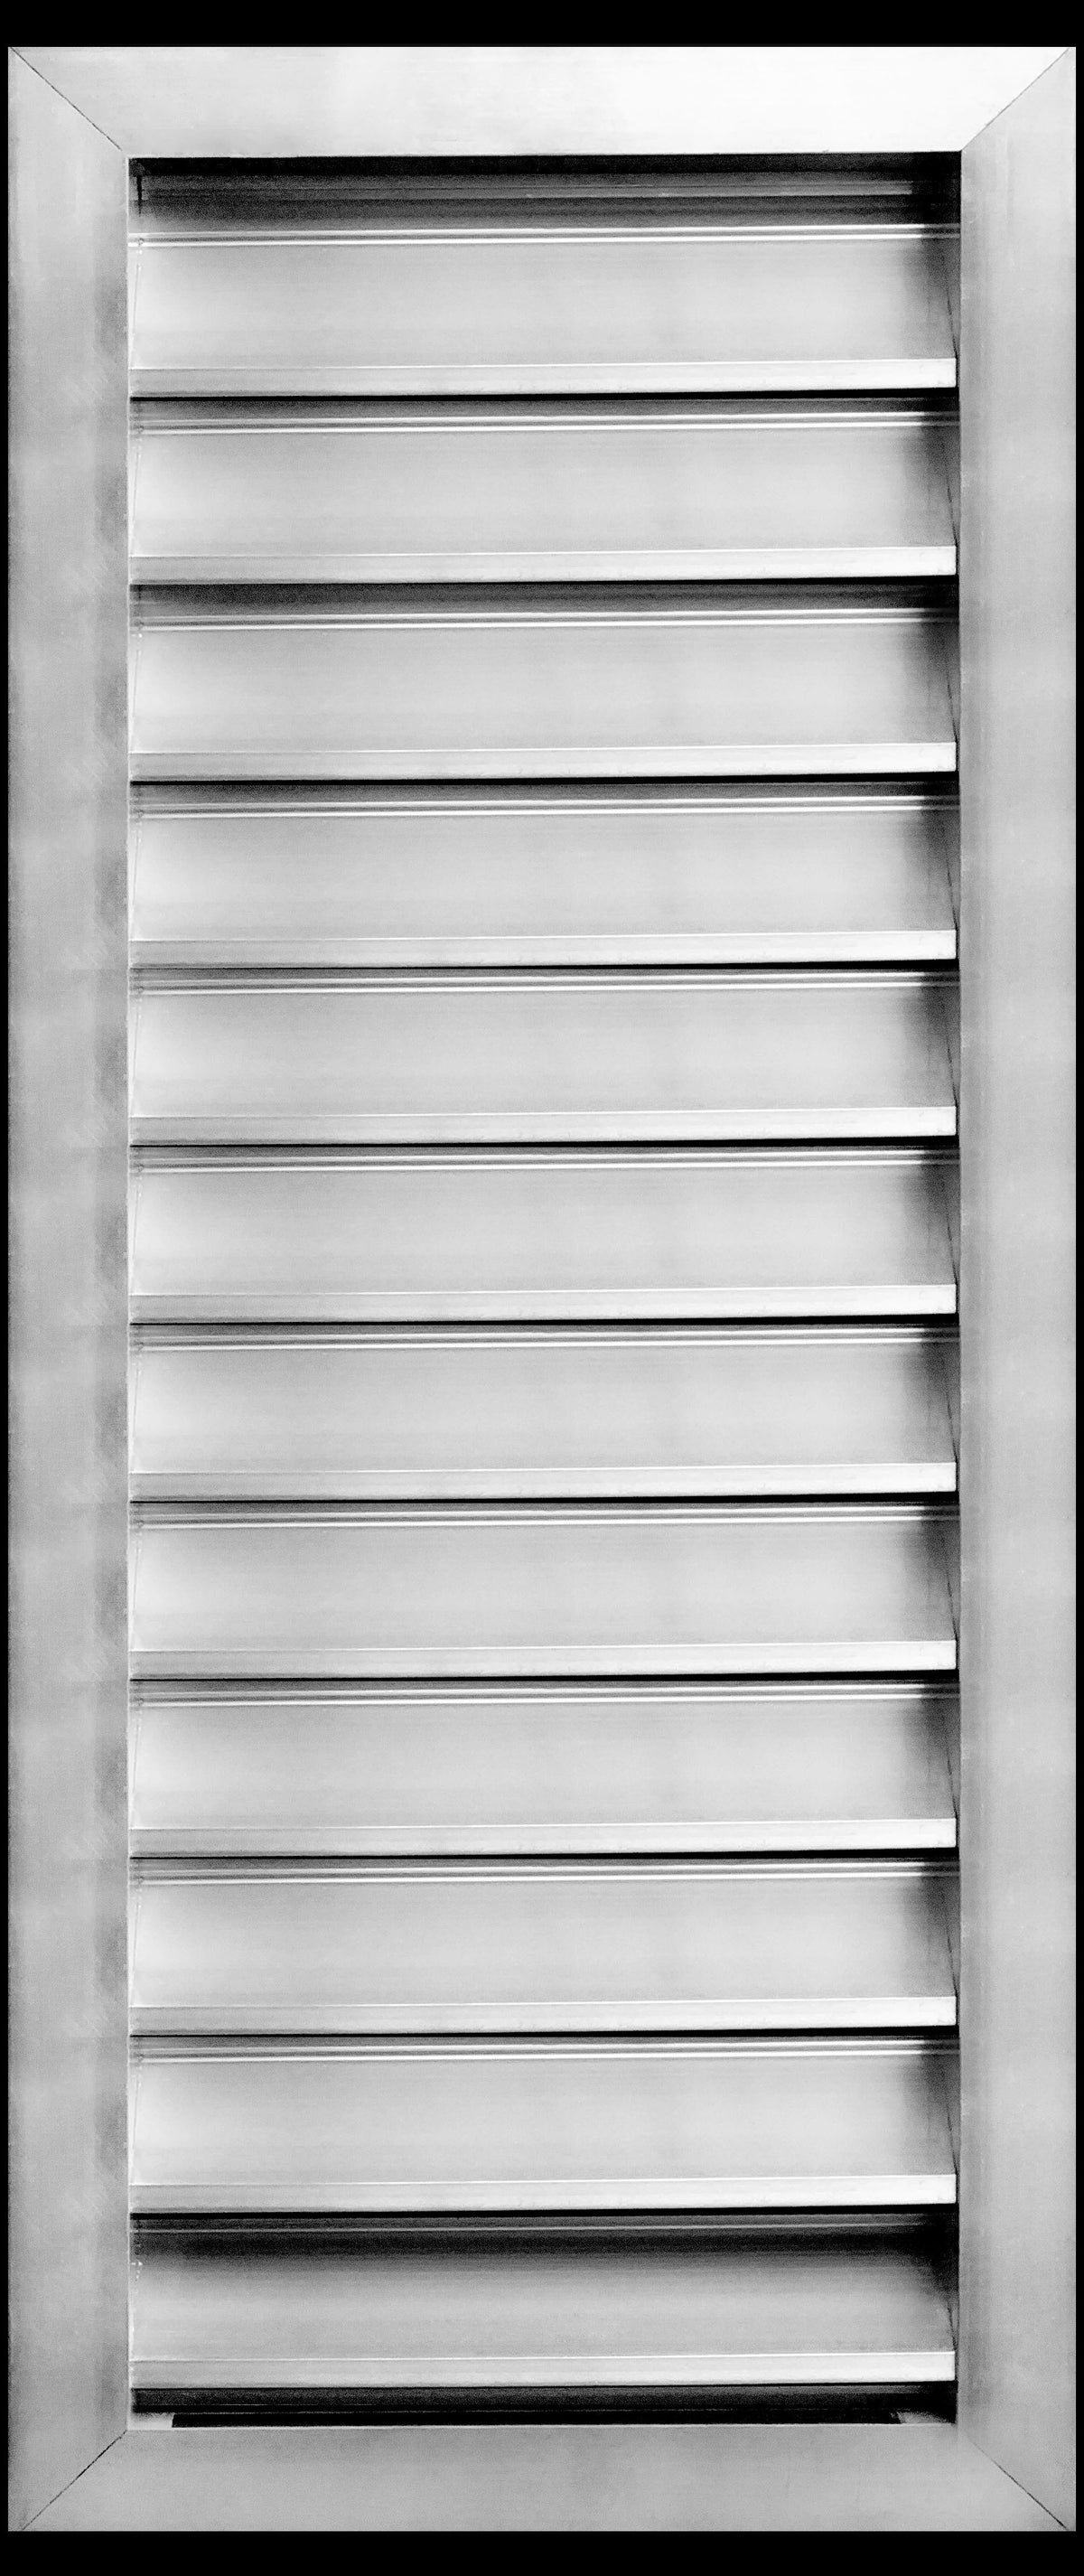 10&quot;w X 26&quot;h Aluminum Outdoor Weather Proof Louvers - Rain &amp; Waterproof Air Vent With Screen Mesh